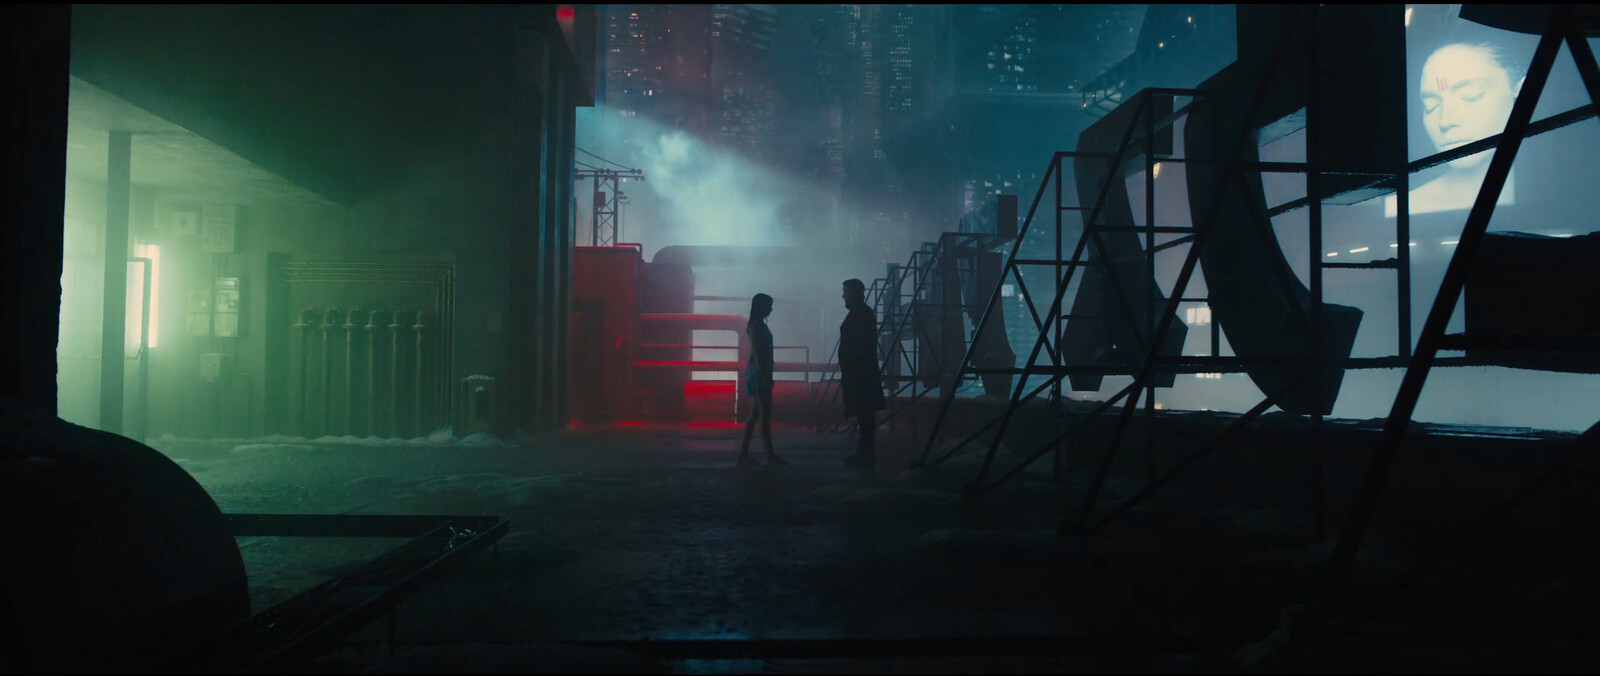 Reference shot from Blade runner 2049